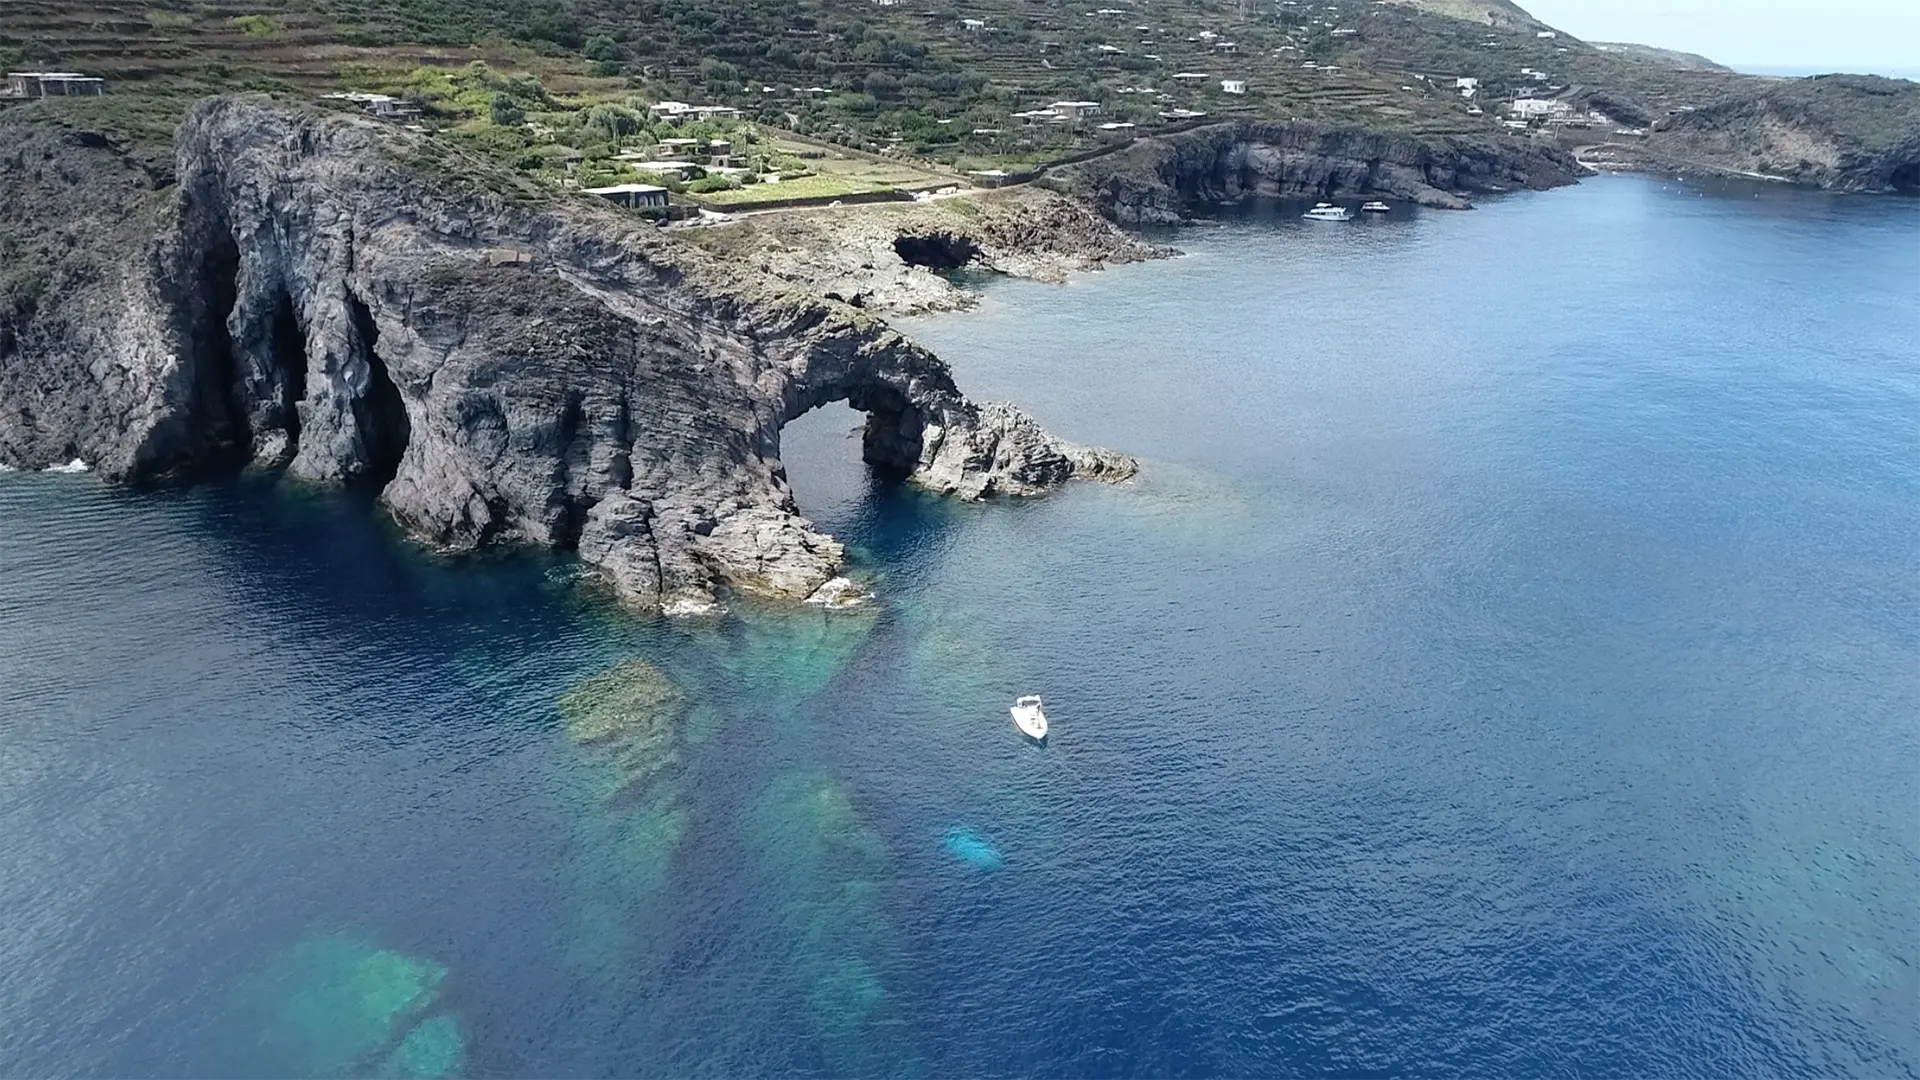 How to rent a boat or a dinghy in Pantelleria?